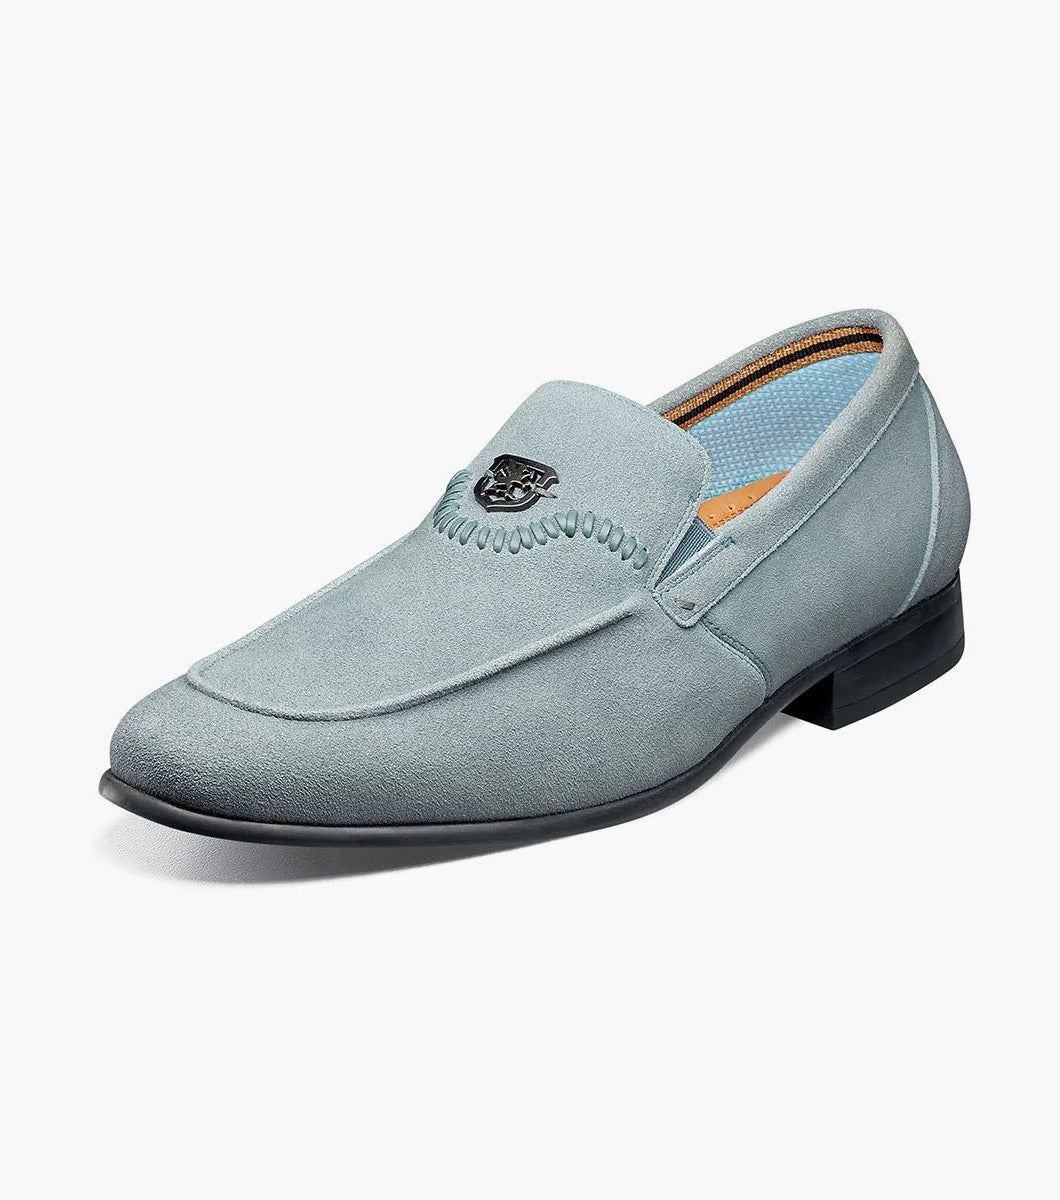 Stacy Adams QUINCY Moc Toe Bit Slip on Color: Light Blue Available in Sizes 12-14